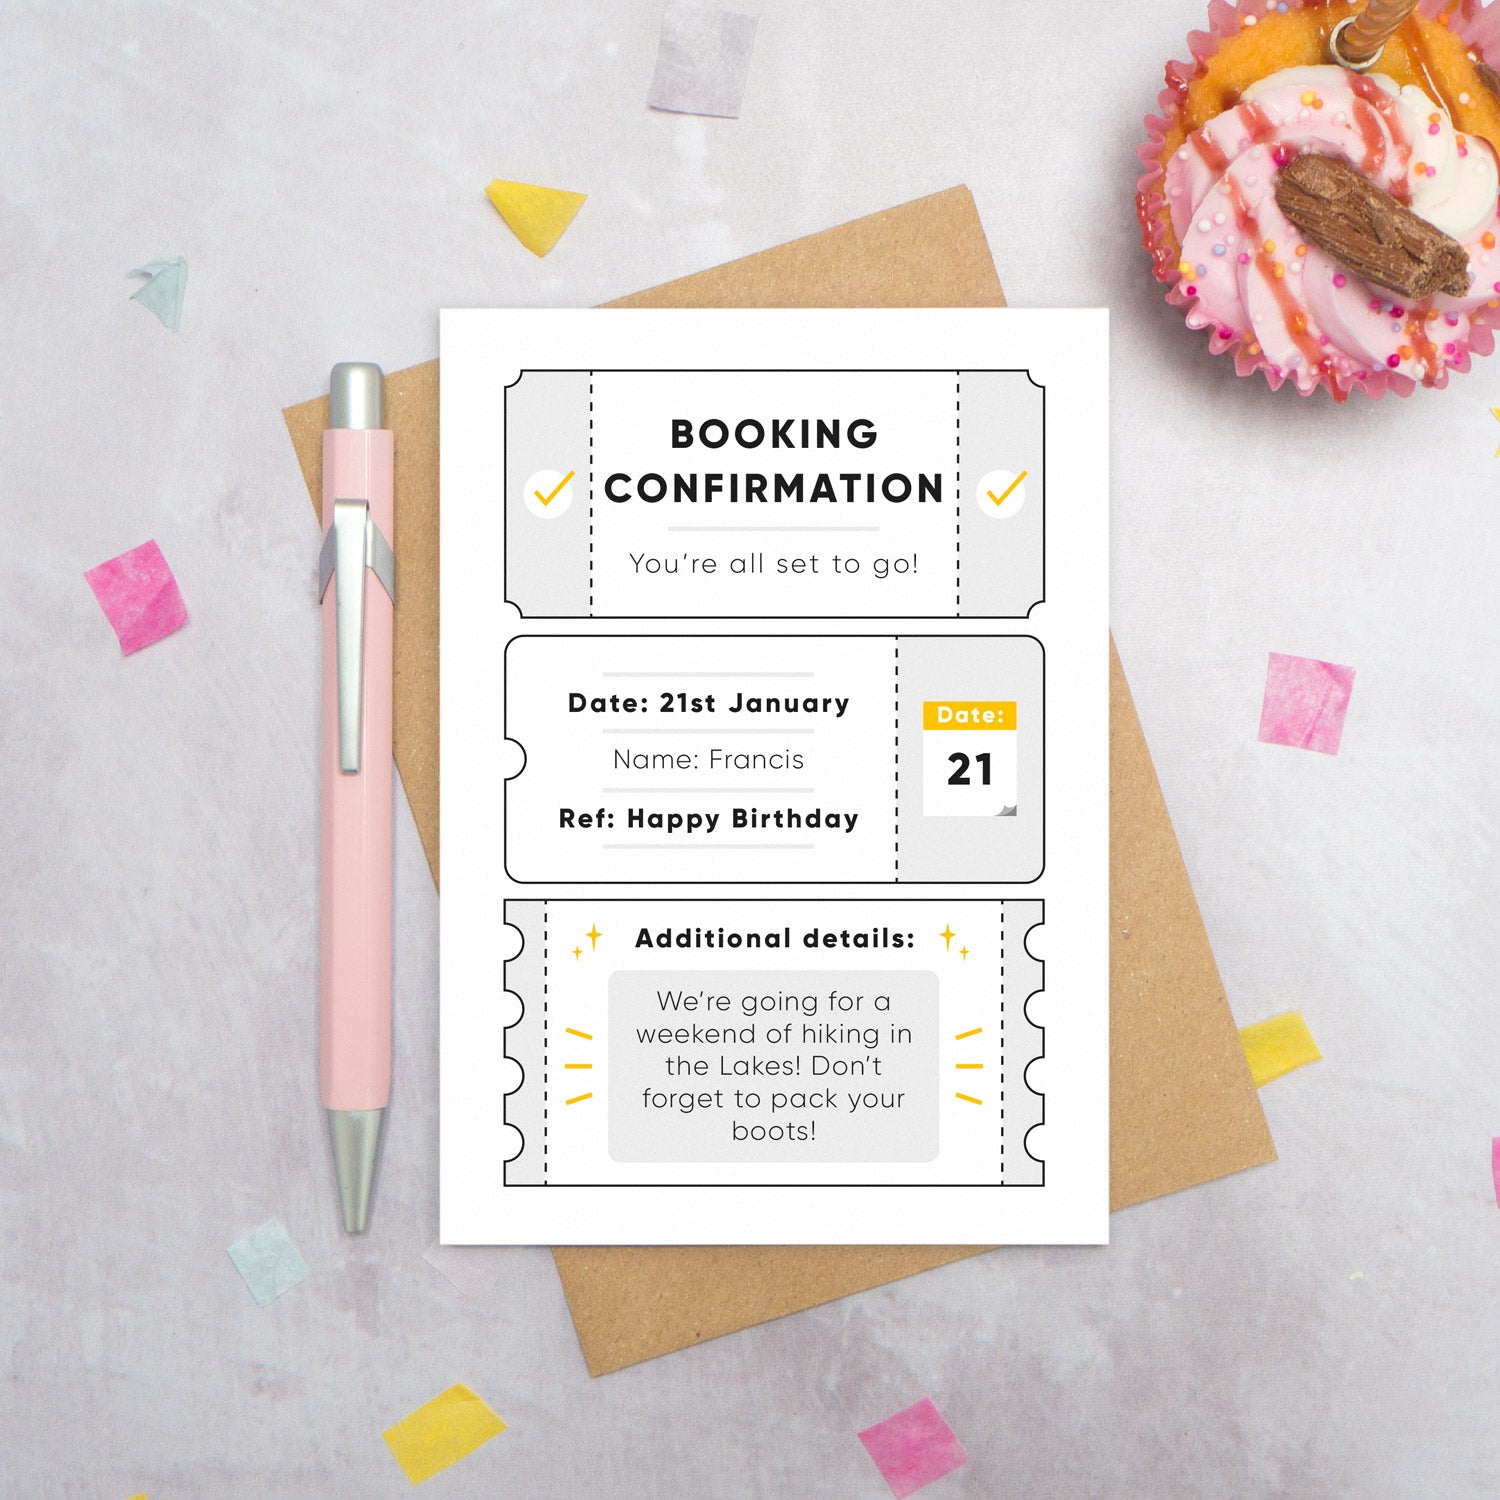 A personalised birthday booking confirmation gift card lying flat lay on a grey surface surrounded by confetti, a cupcake and a pink pen. The card is lying on it’s kraft brown envelope and pictured is the grey version of the gift card.